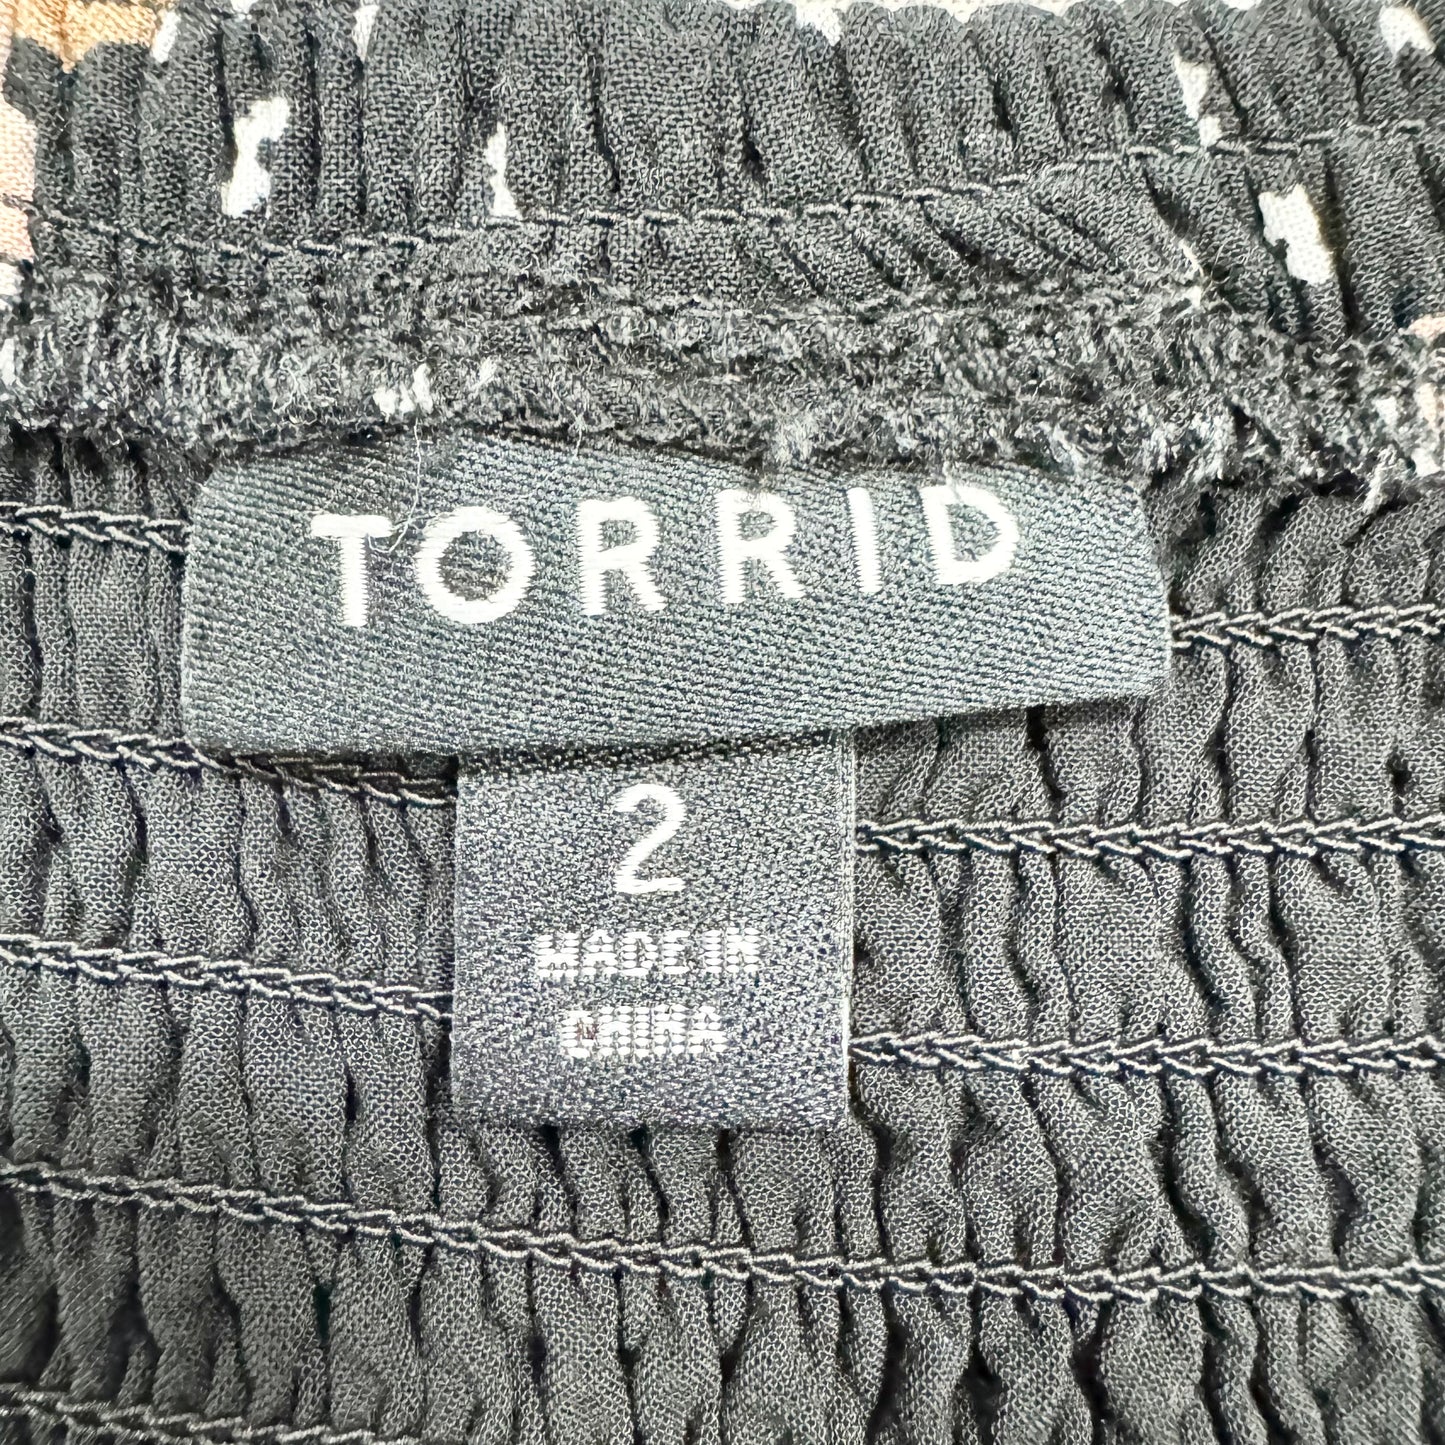 Top 3/4 Sleeve By Torrid  Size: 2x